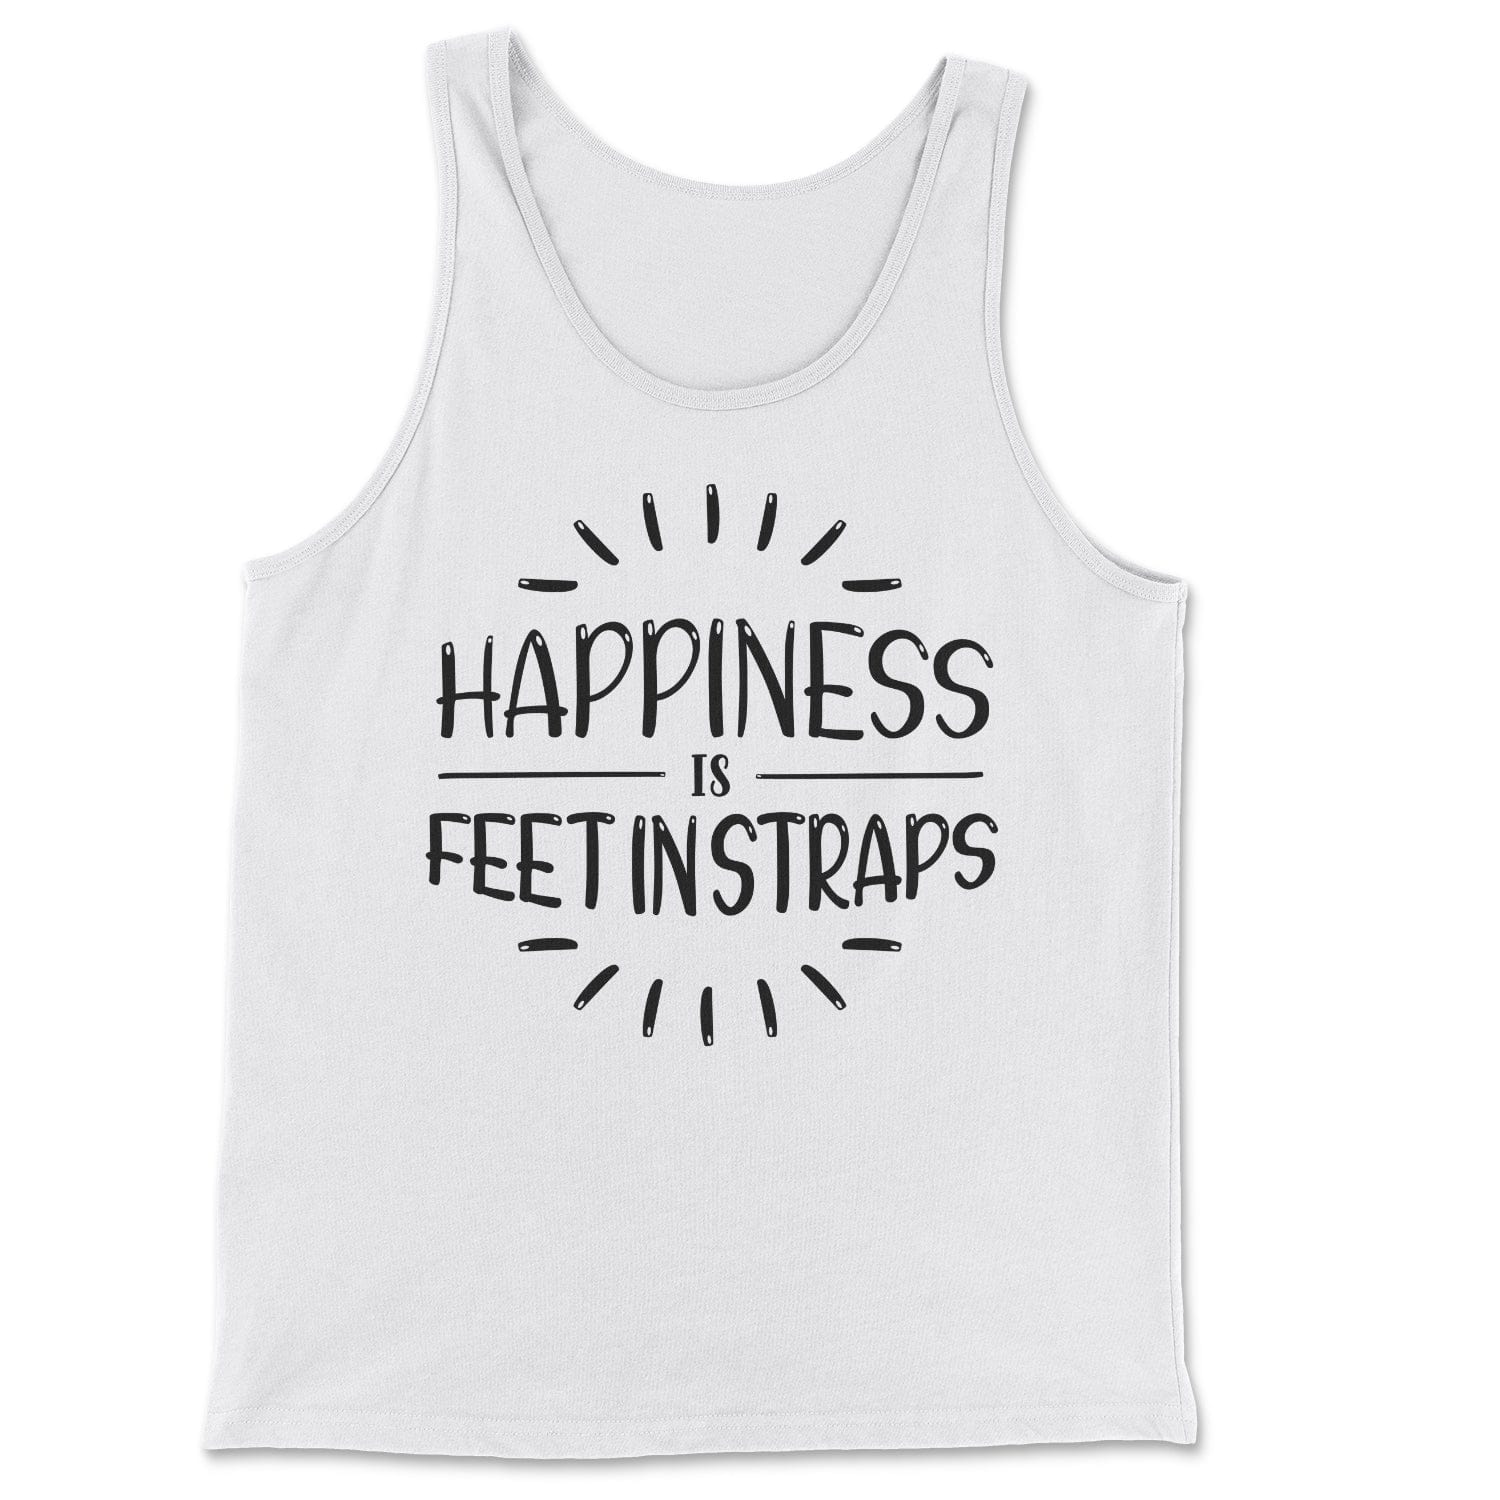 "Happiness is Feet in Straps" - Classic Tank Skyba Print Material